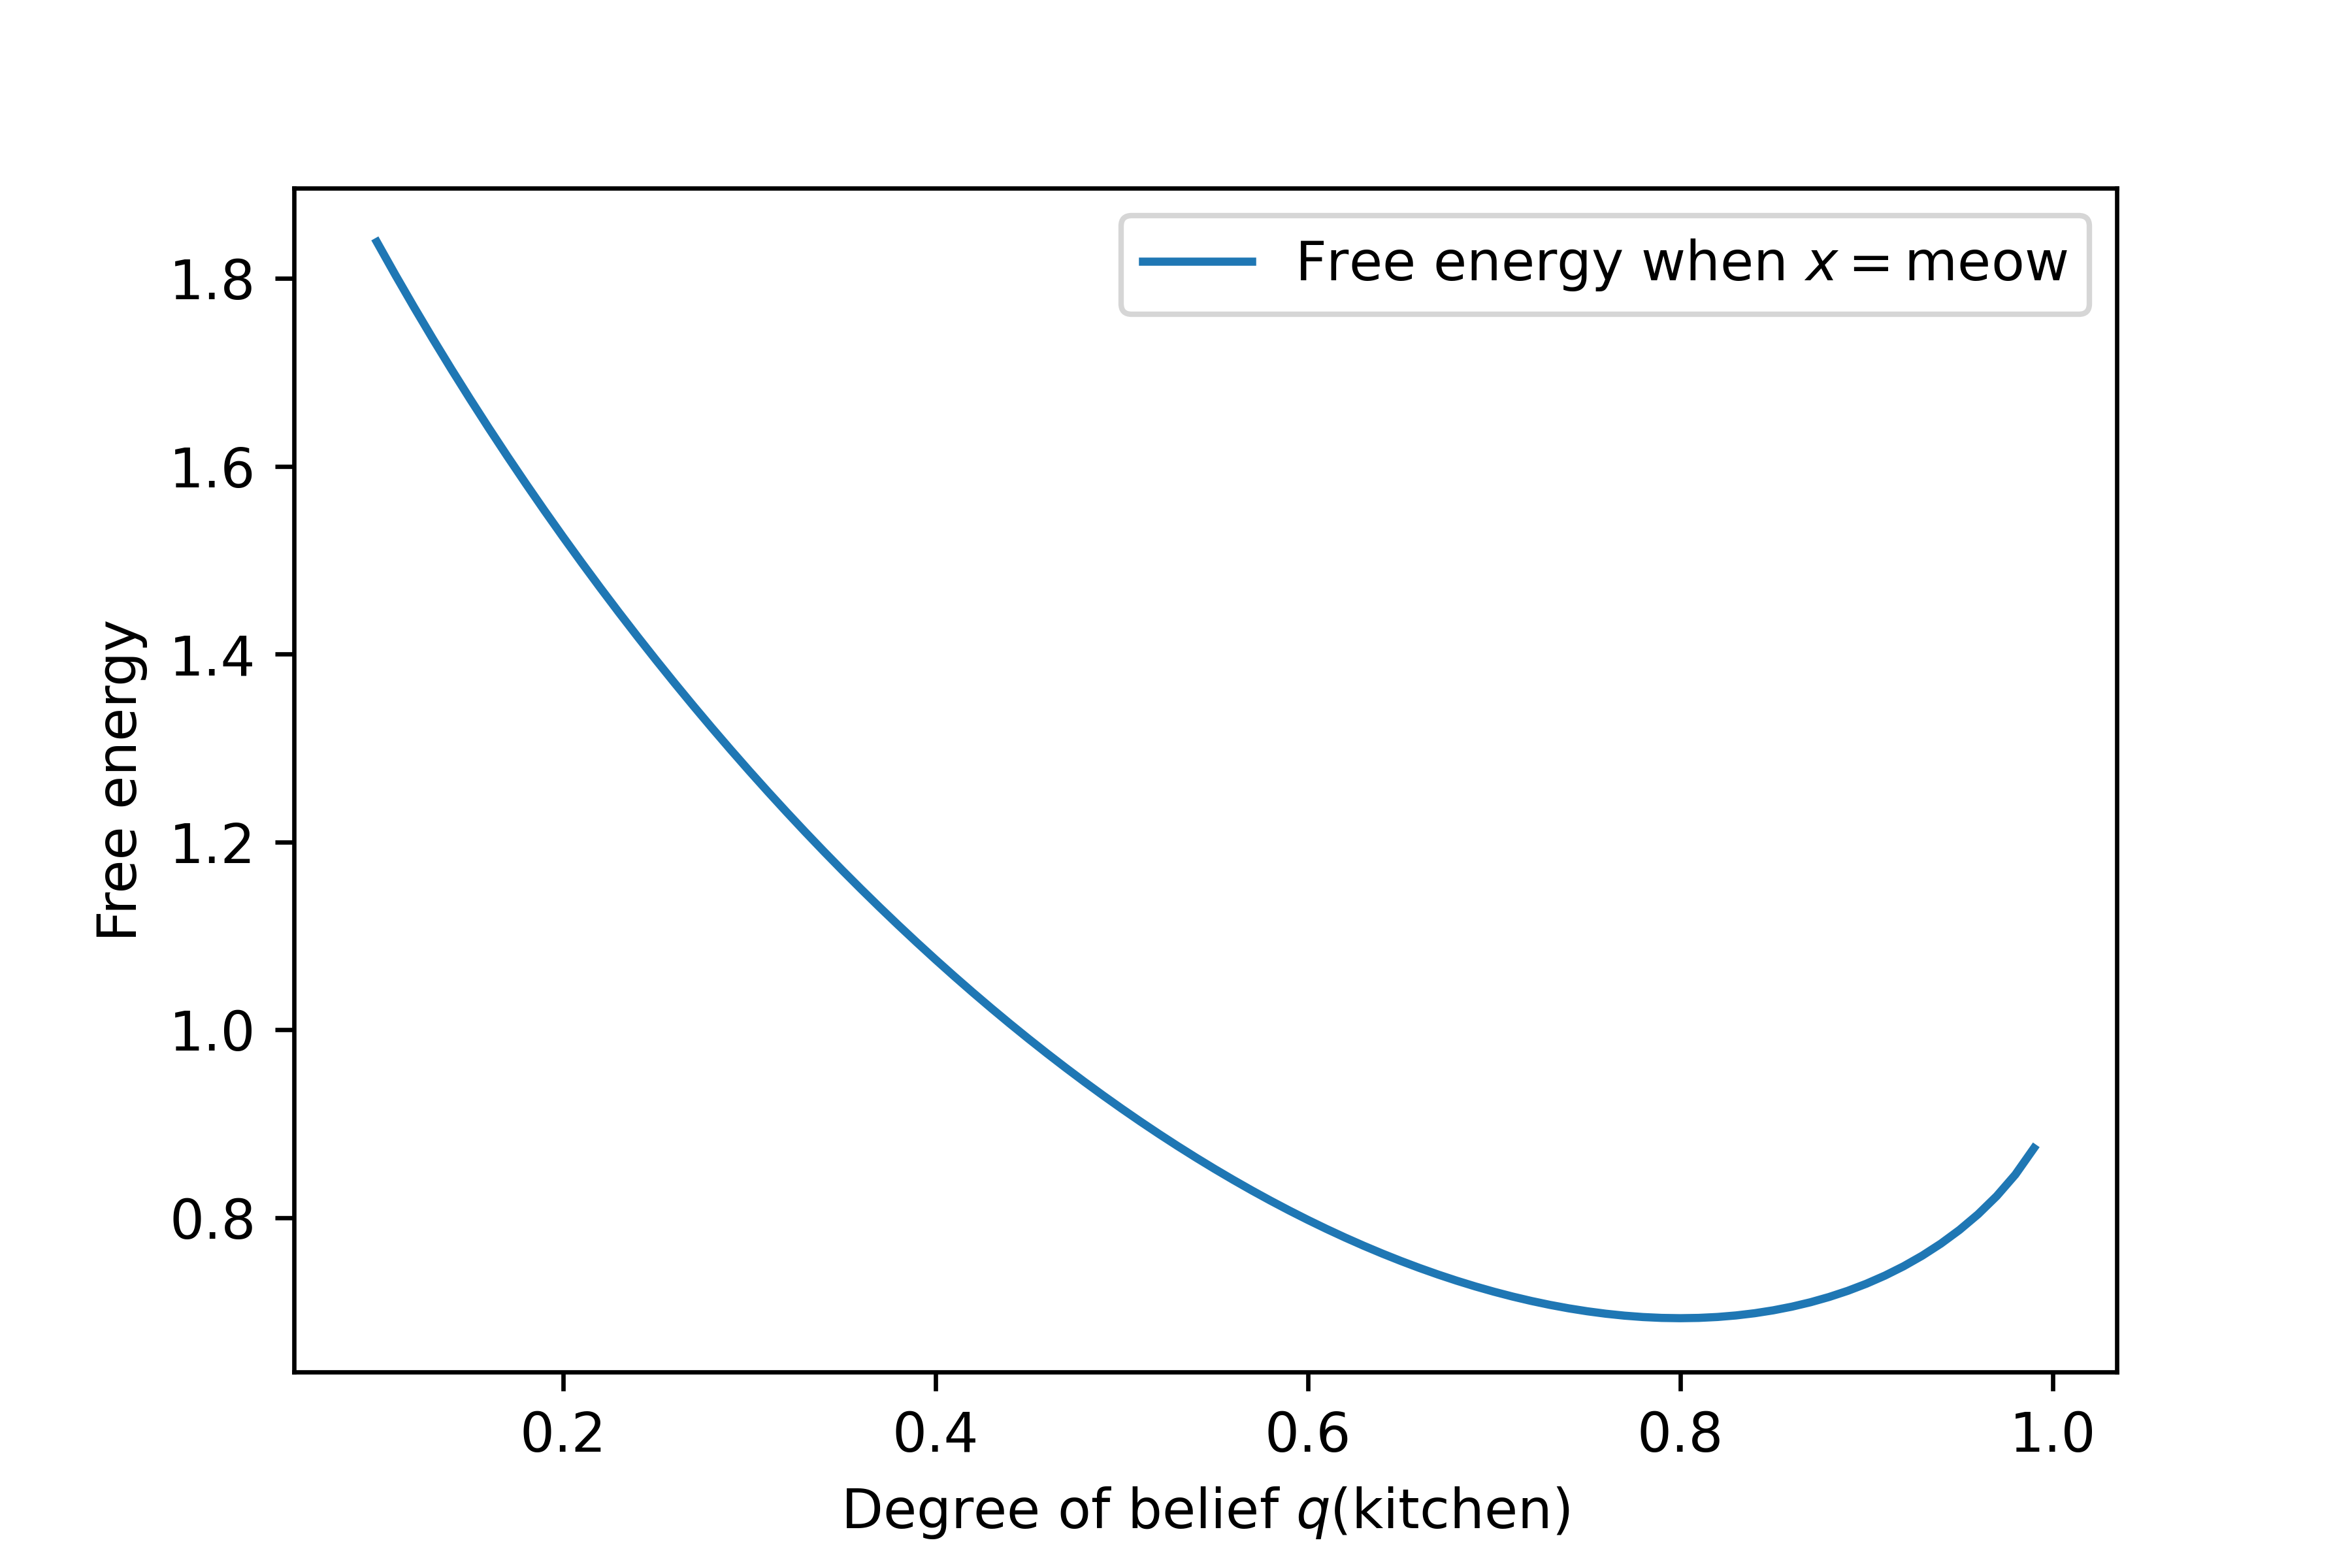 Free energy as a function of the degree of belief that the cat is in the kitchen